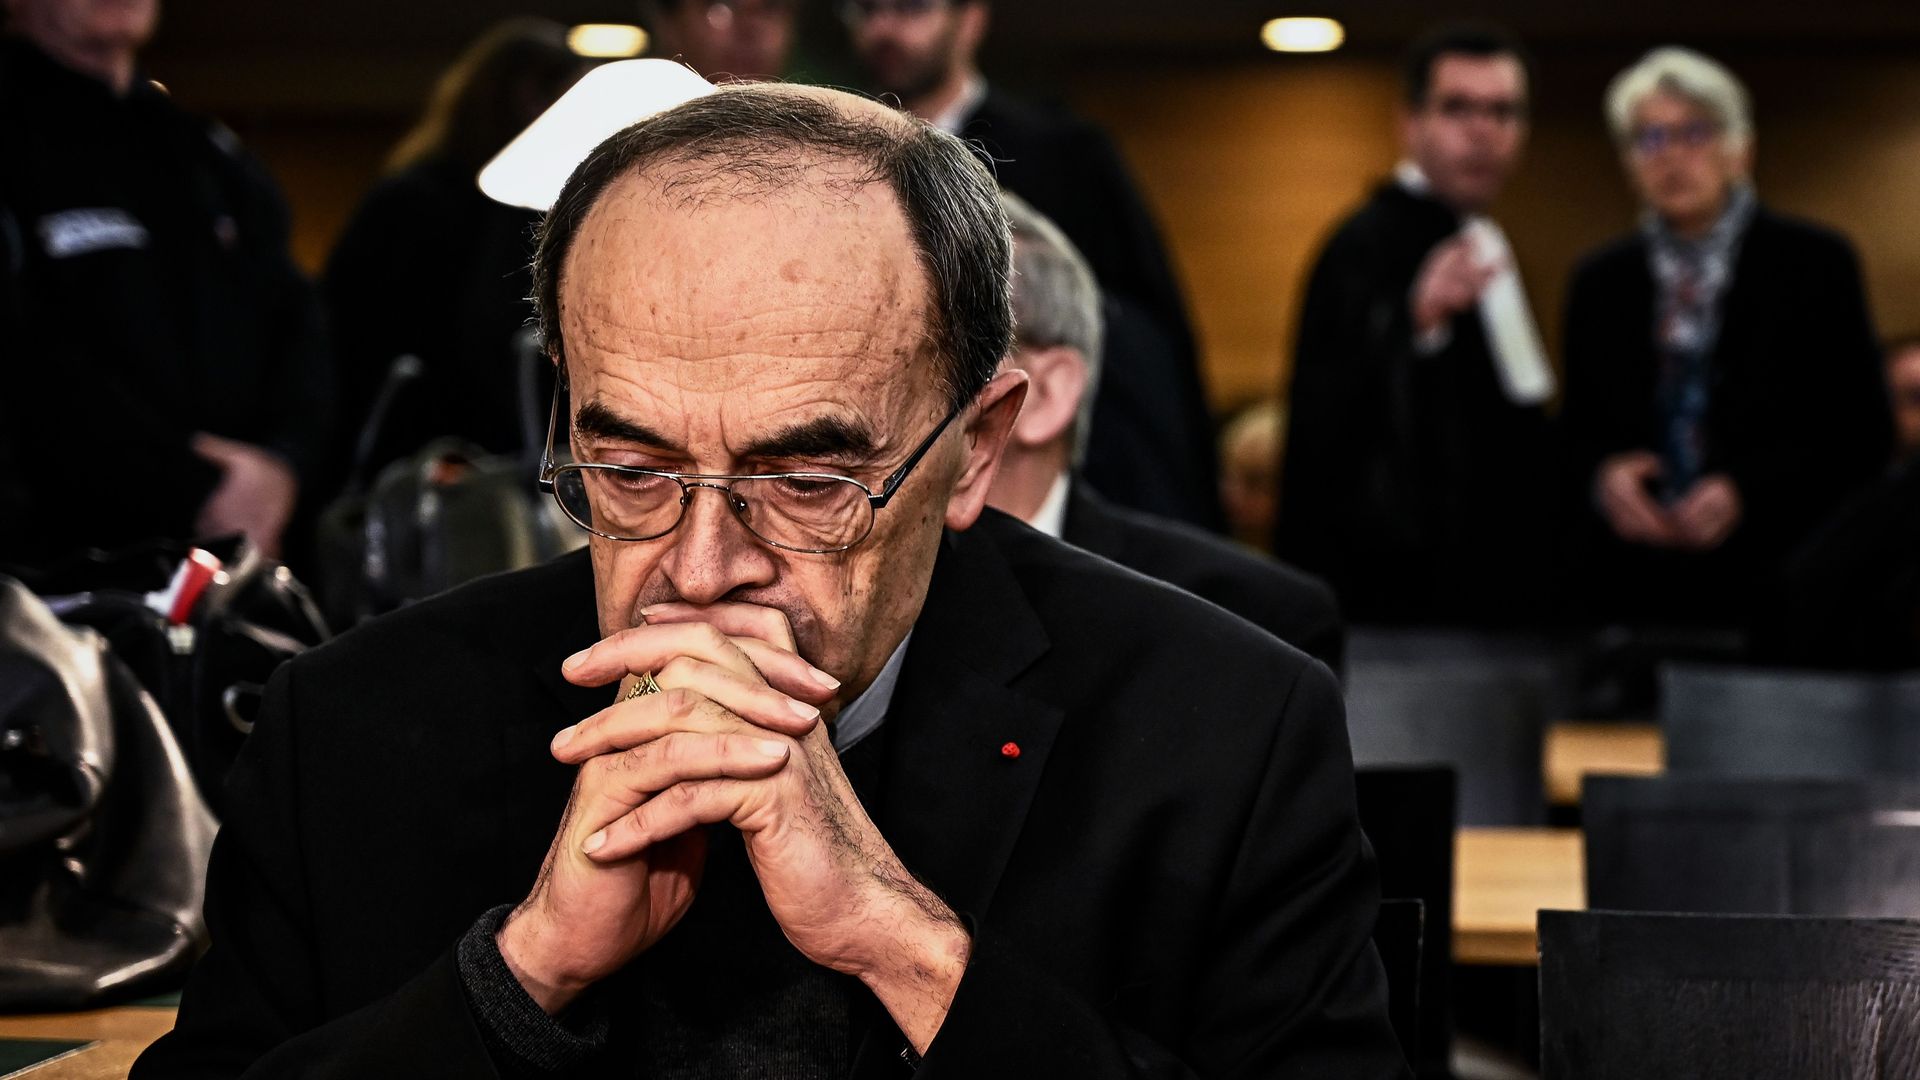 Cardinal Philippe Barbarin had pleaded not guilty to the charges.